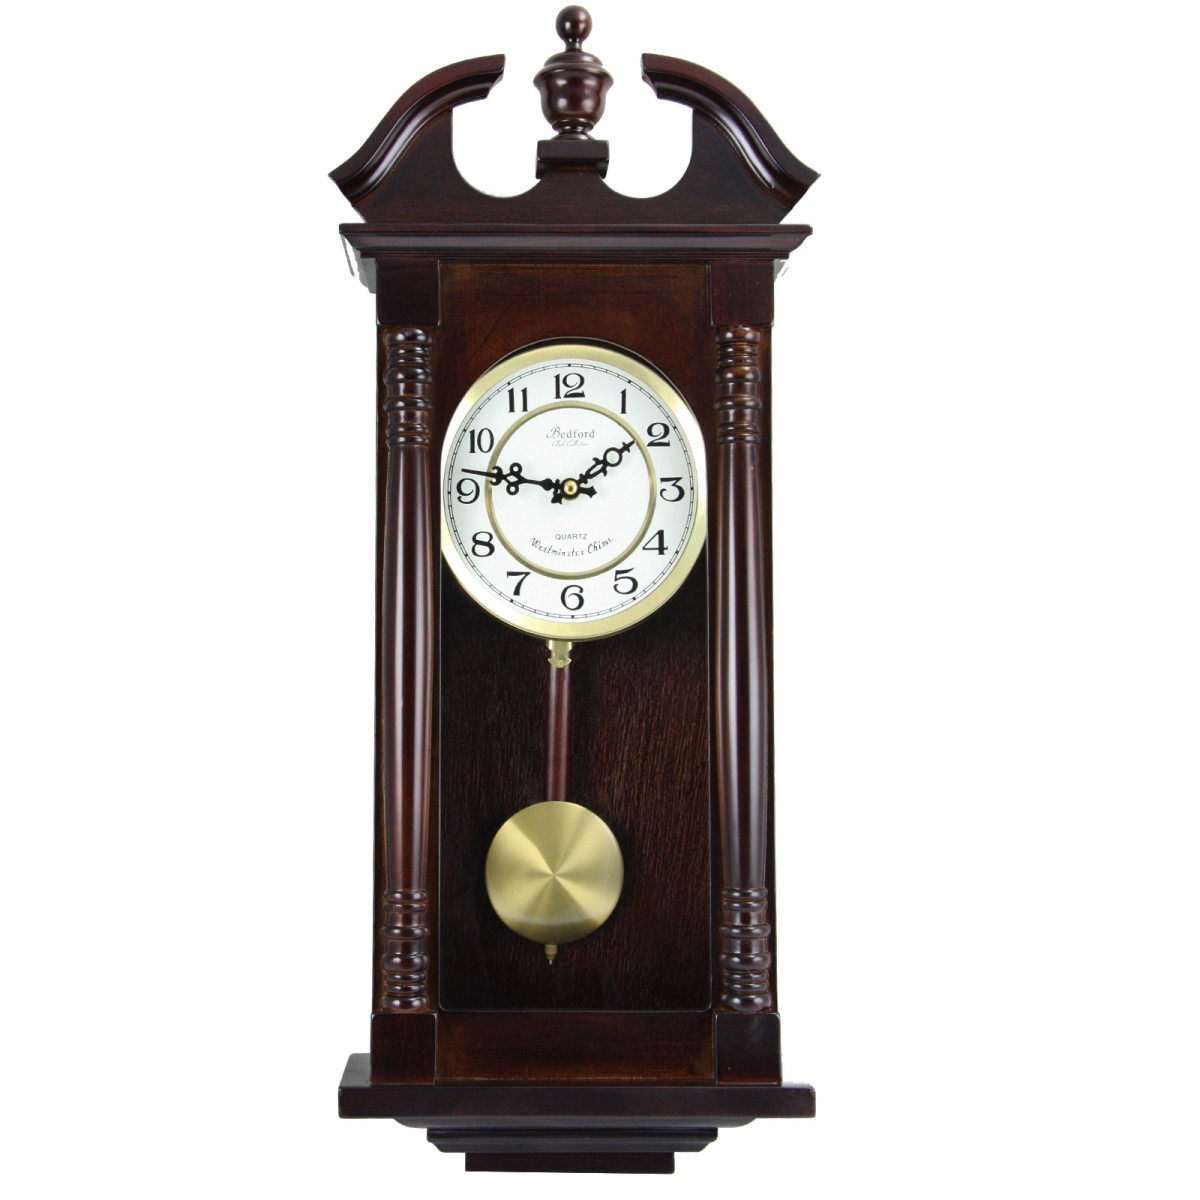 Picture of Bedford Clock Collection BED-1912 27.5 in. Classic Chiming Wall Clock with Swinging Pendulum, Cherry Oak Finish